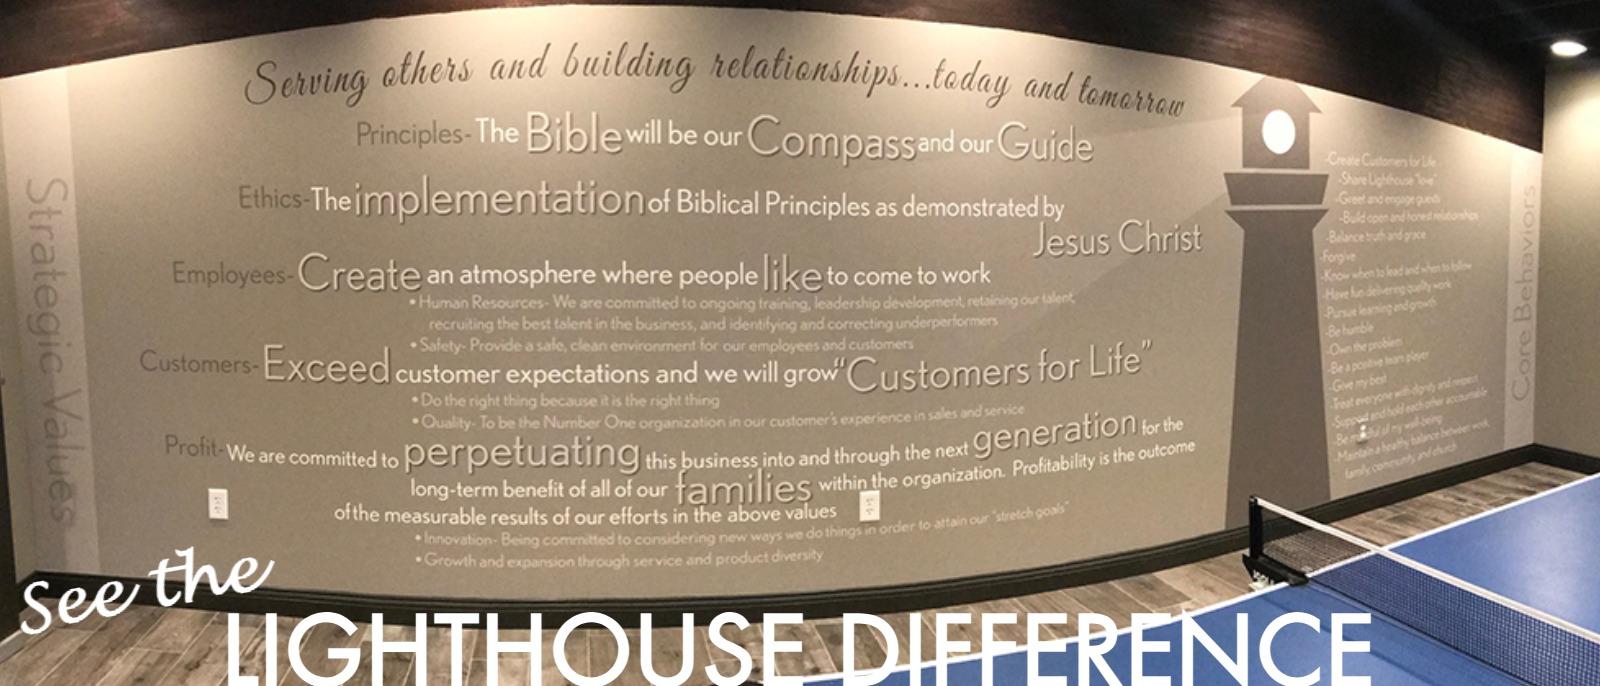 See the Lighthouse Difference. Lighthouse Buick GMC. Morton, IL. Car Dealership. Illinois Car Dealership. Automotive Dealership. Strategic Values. Bible. Jesus Christ. Customers for life.